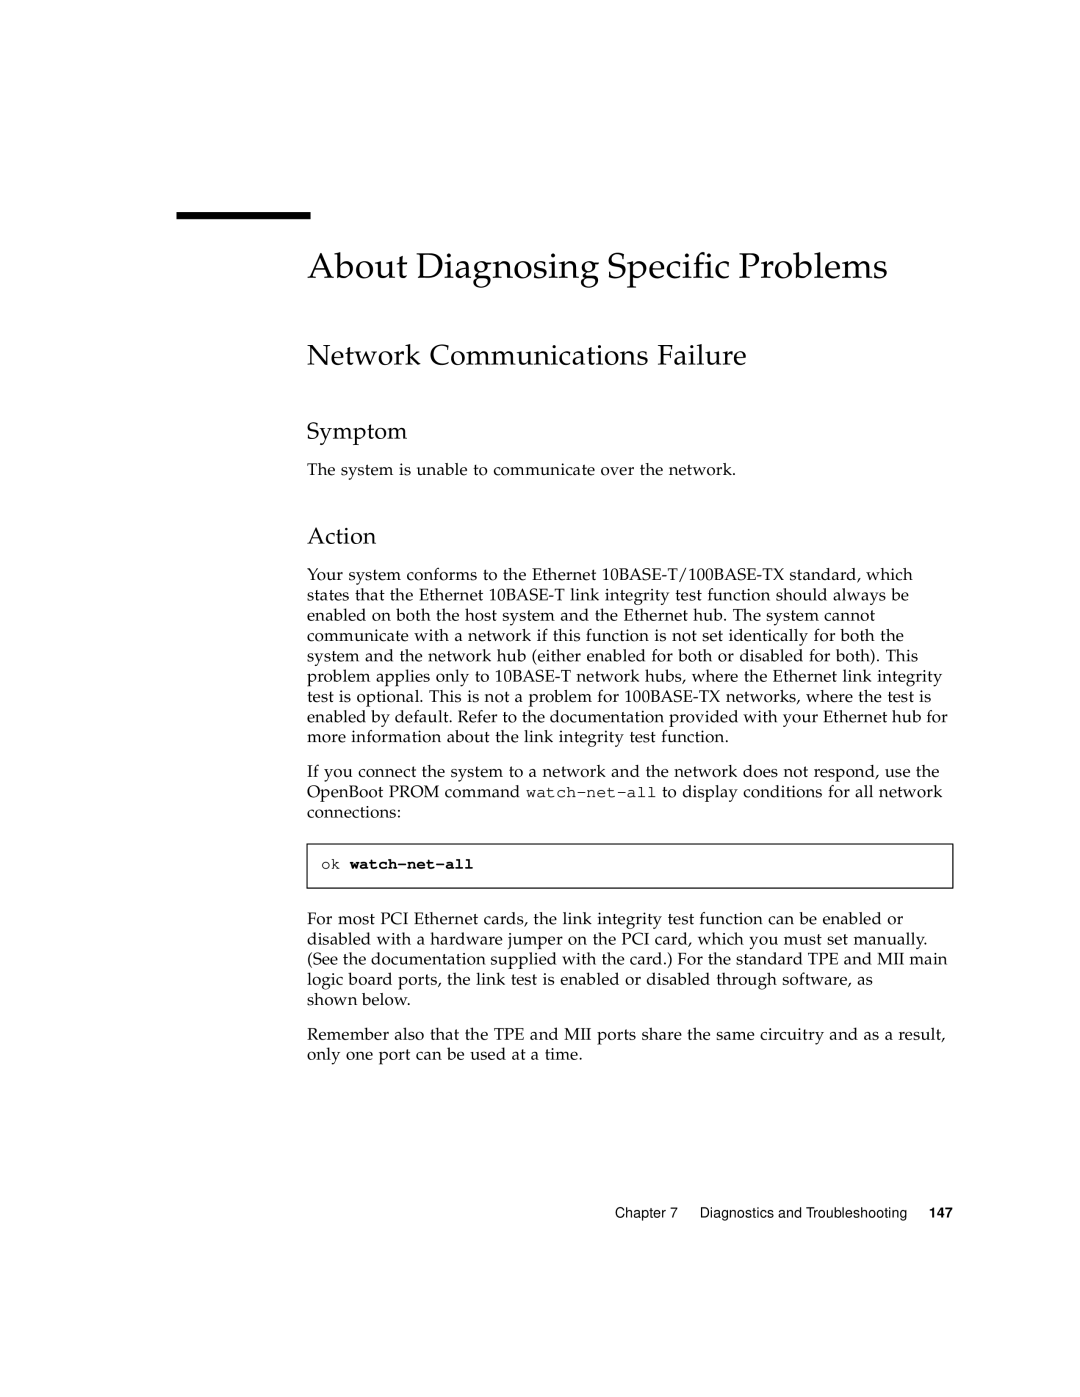 Sun Microsystems 220R manual About Diagnosing Specific Problems, Network Communications Failure, Symptom, Action 